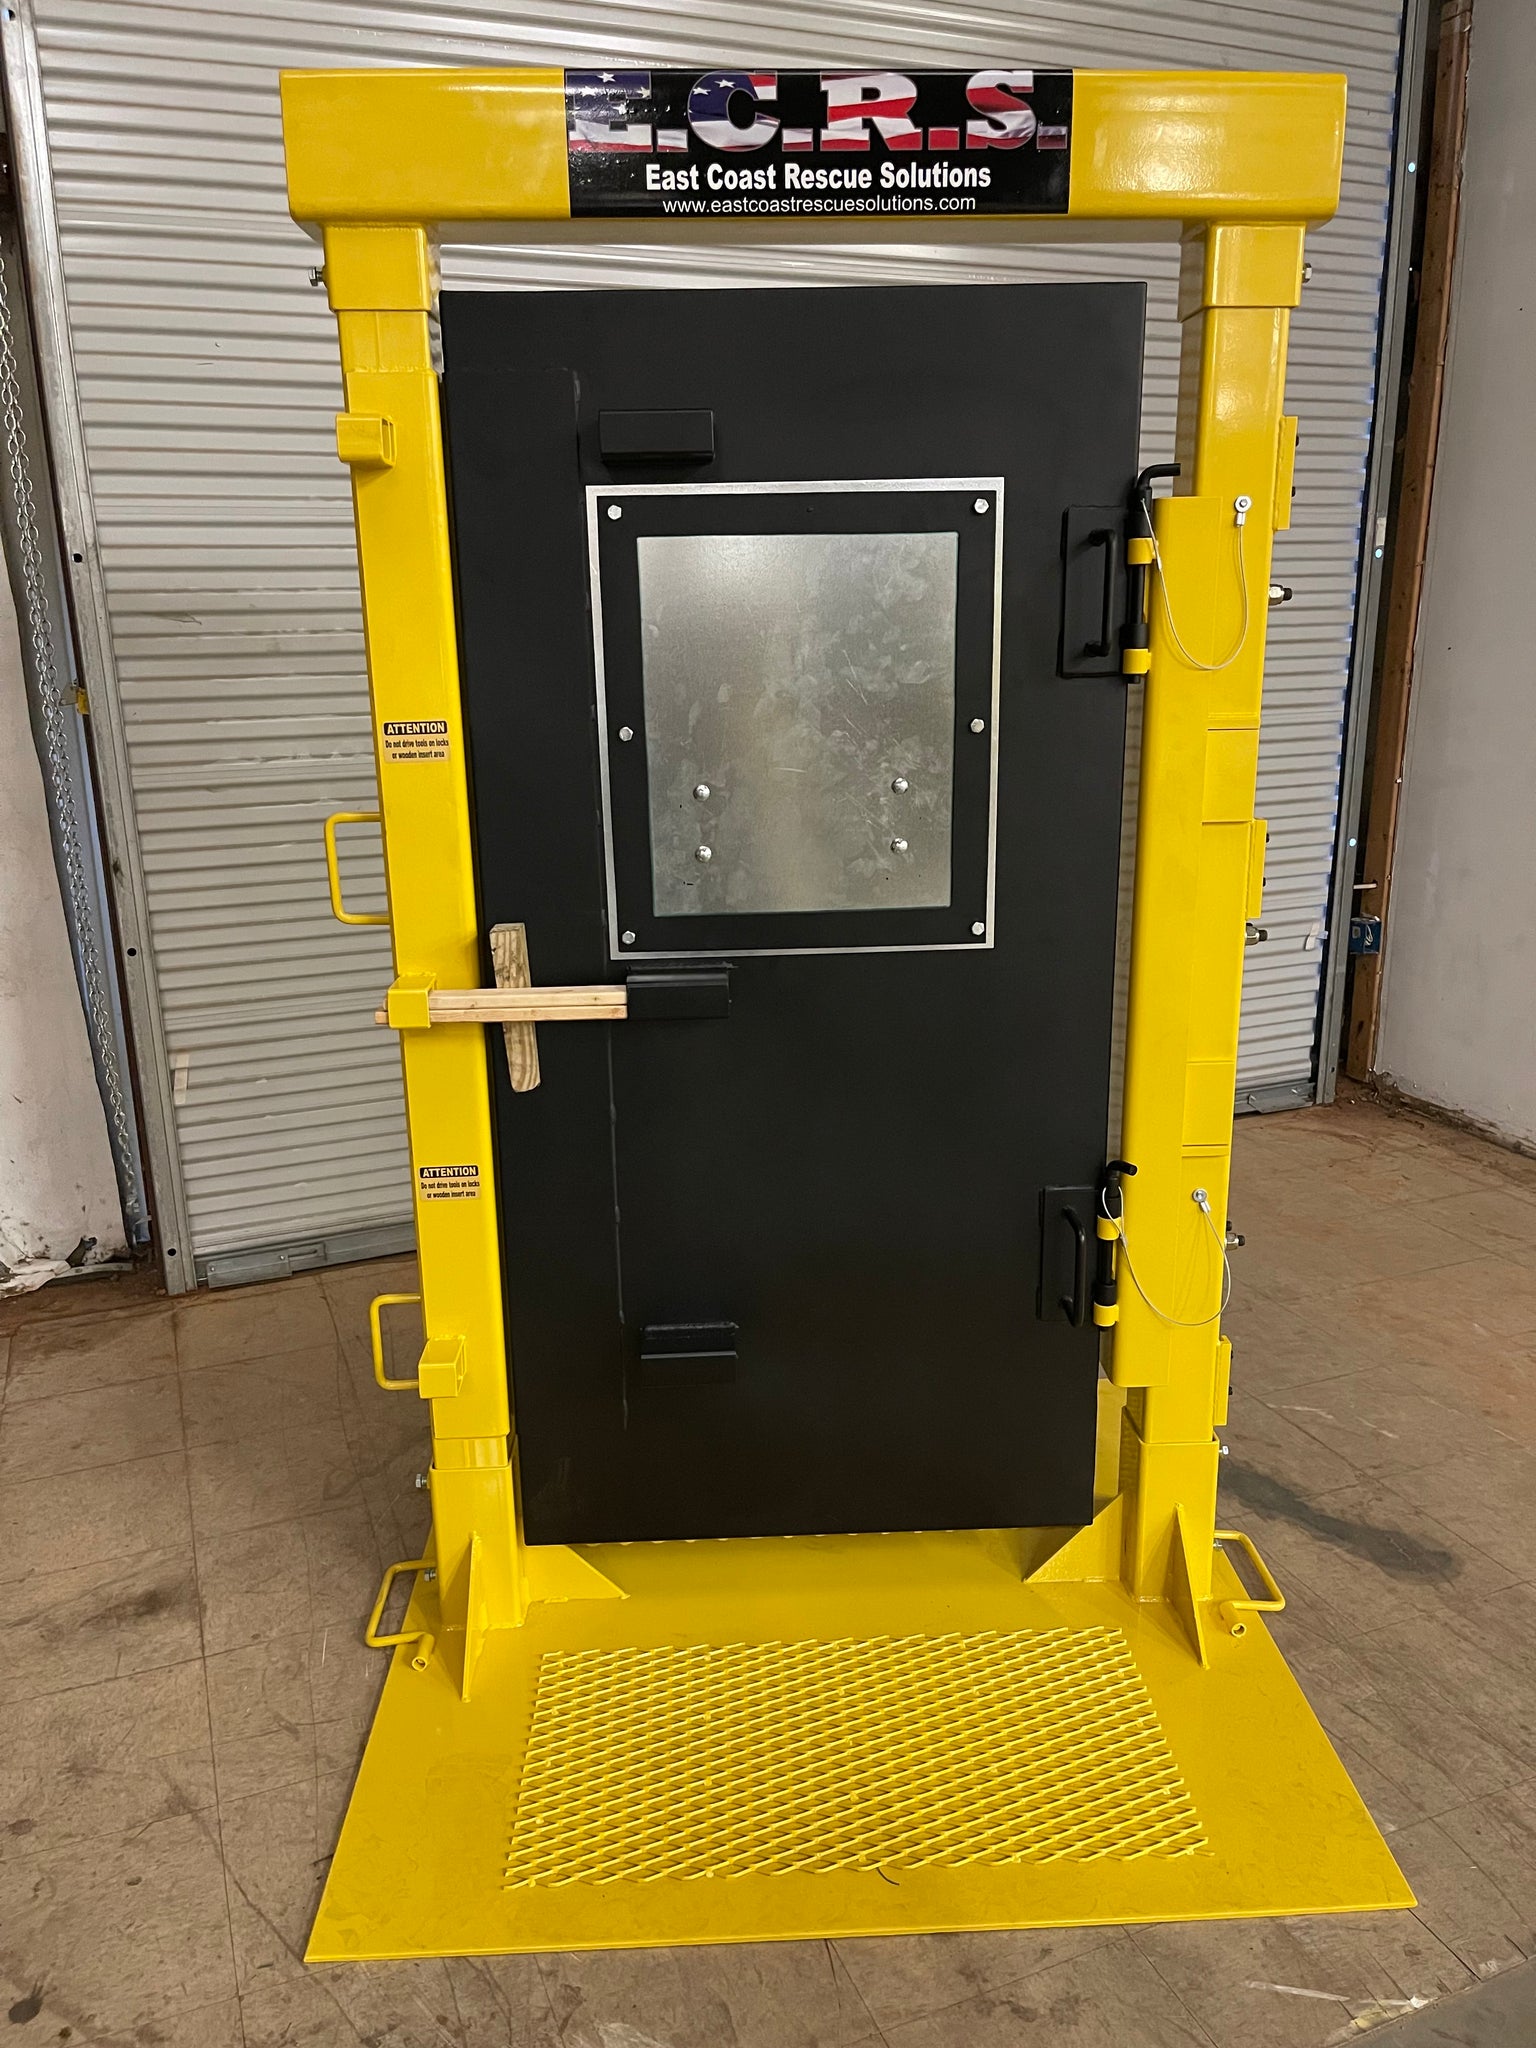 east-coast-rescue-solutions-gen3-forcible-entry-door-simulator-with-dr